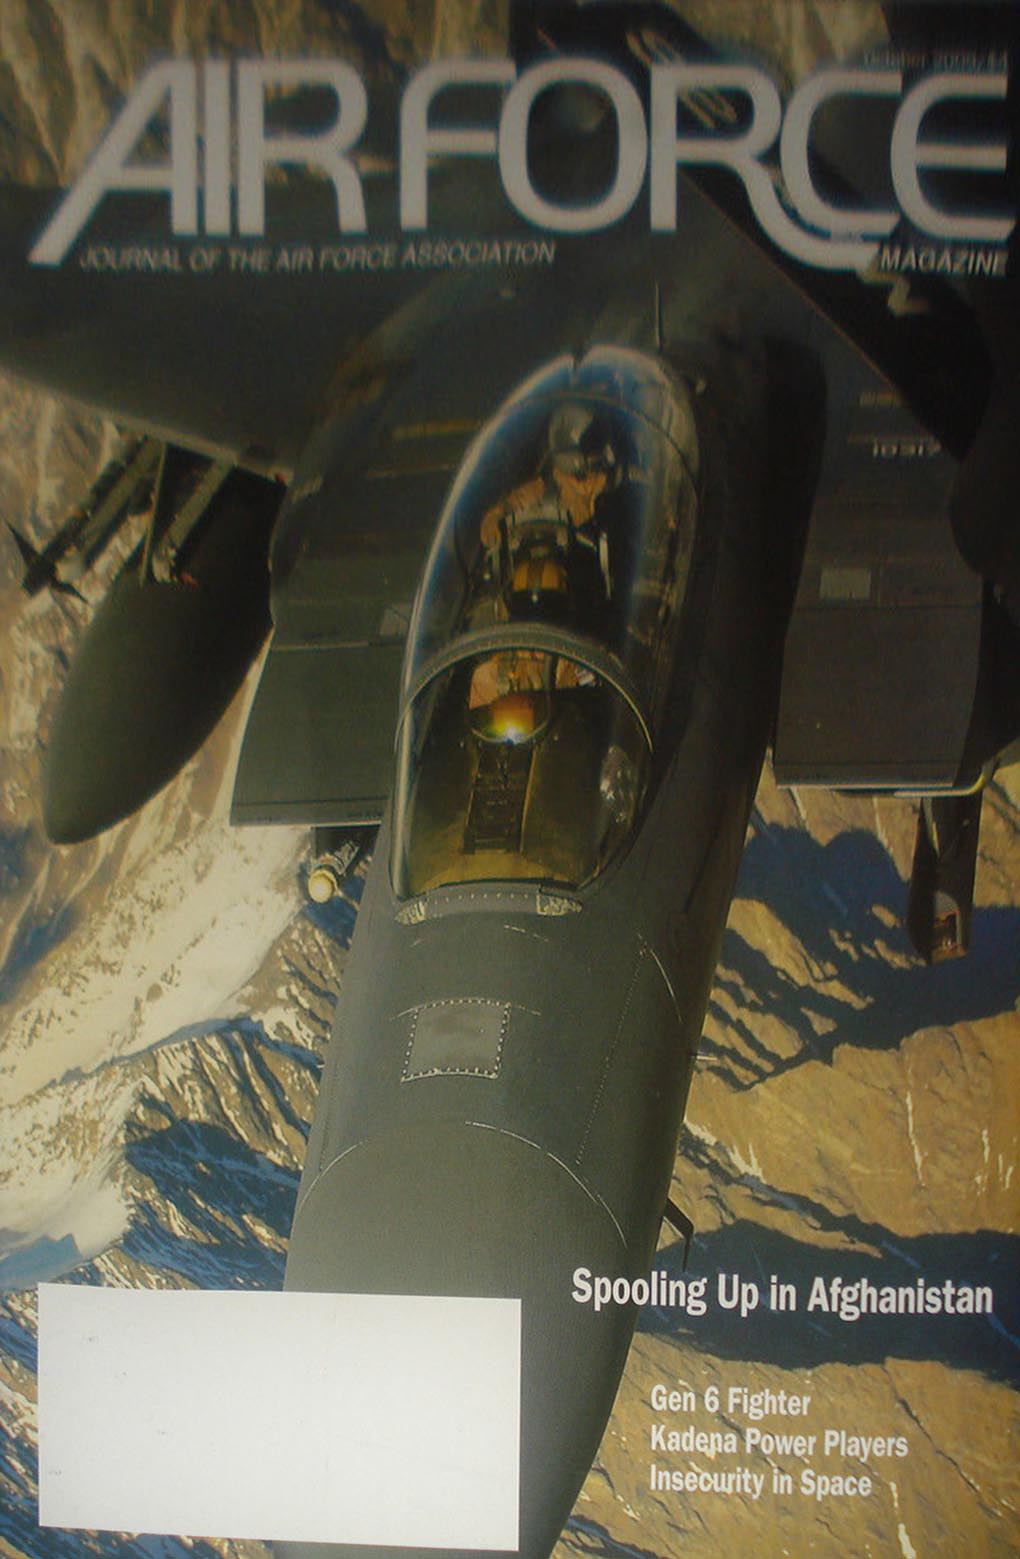 Air Force October 2009 magazine back issue Air Force magizine back copy 